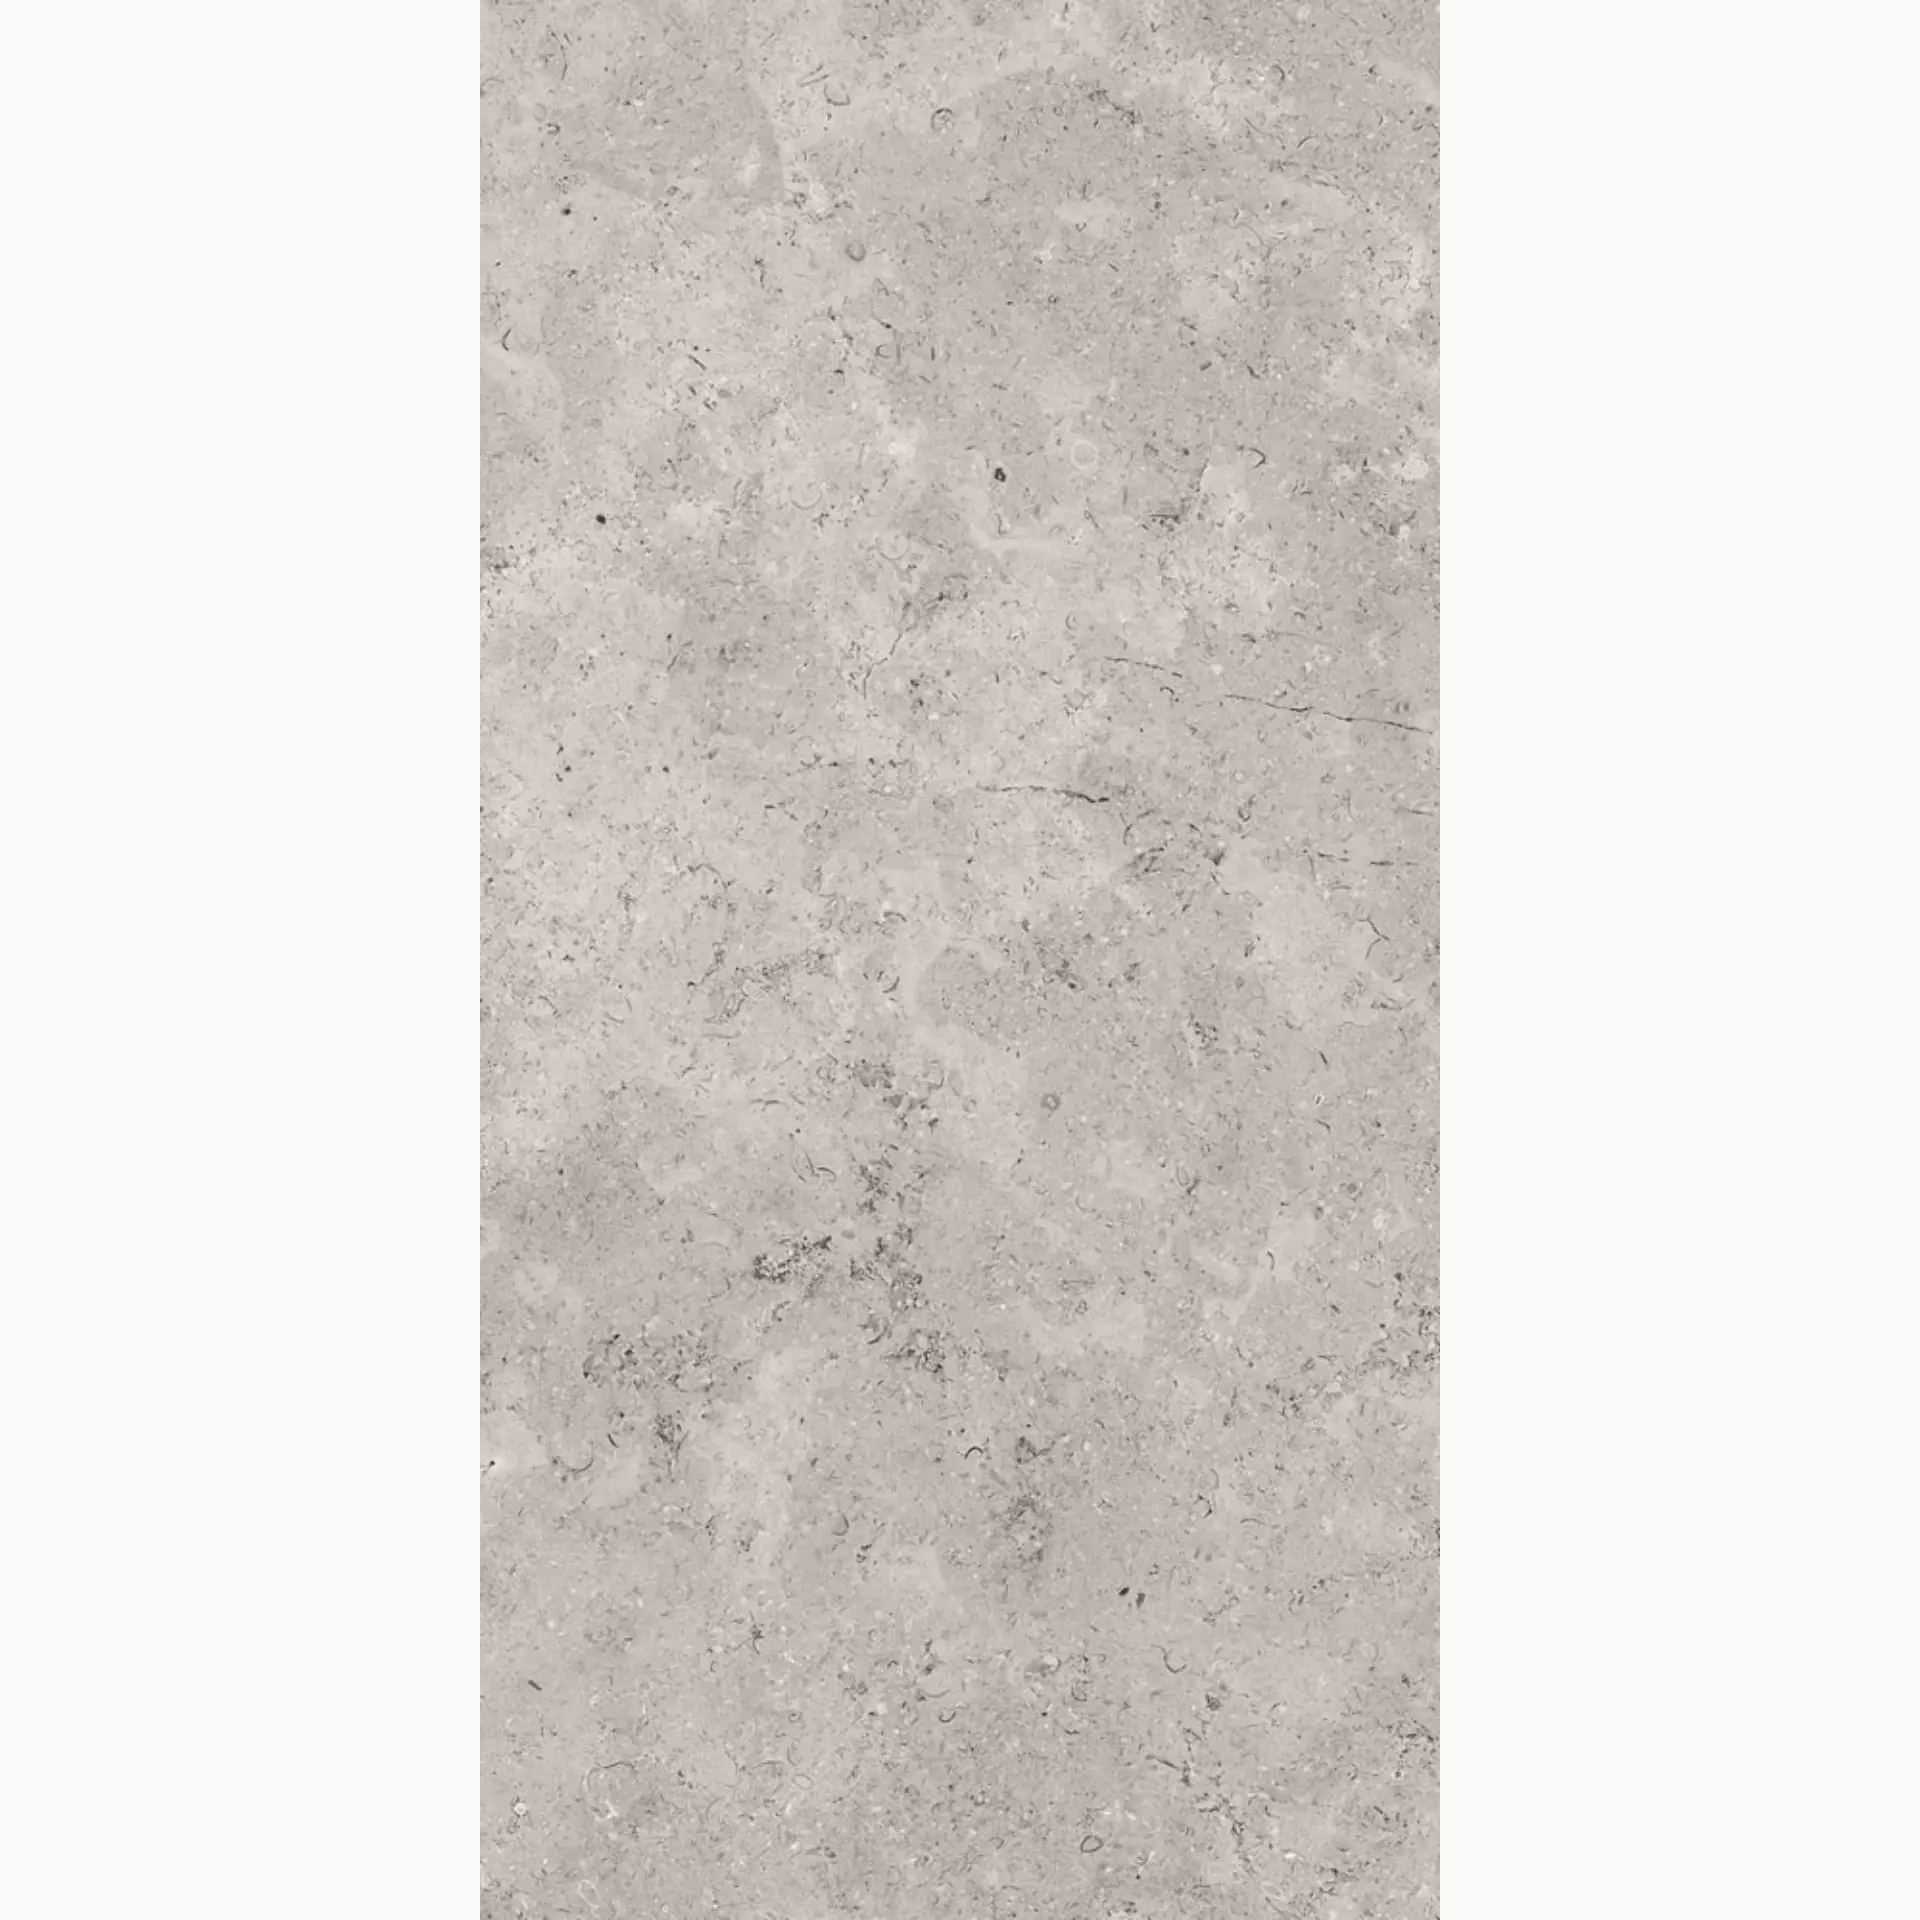 Sant Agostino Unionstone 2 Cedre Grey Natural CSACEDGR30 30x60cm rectified 10mm